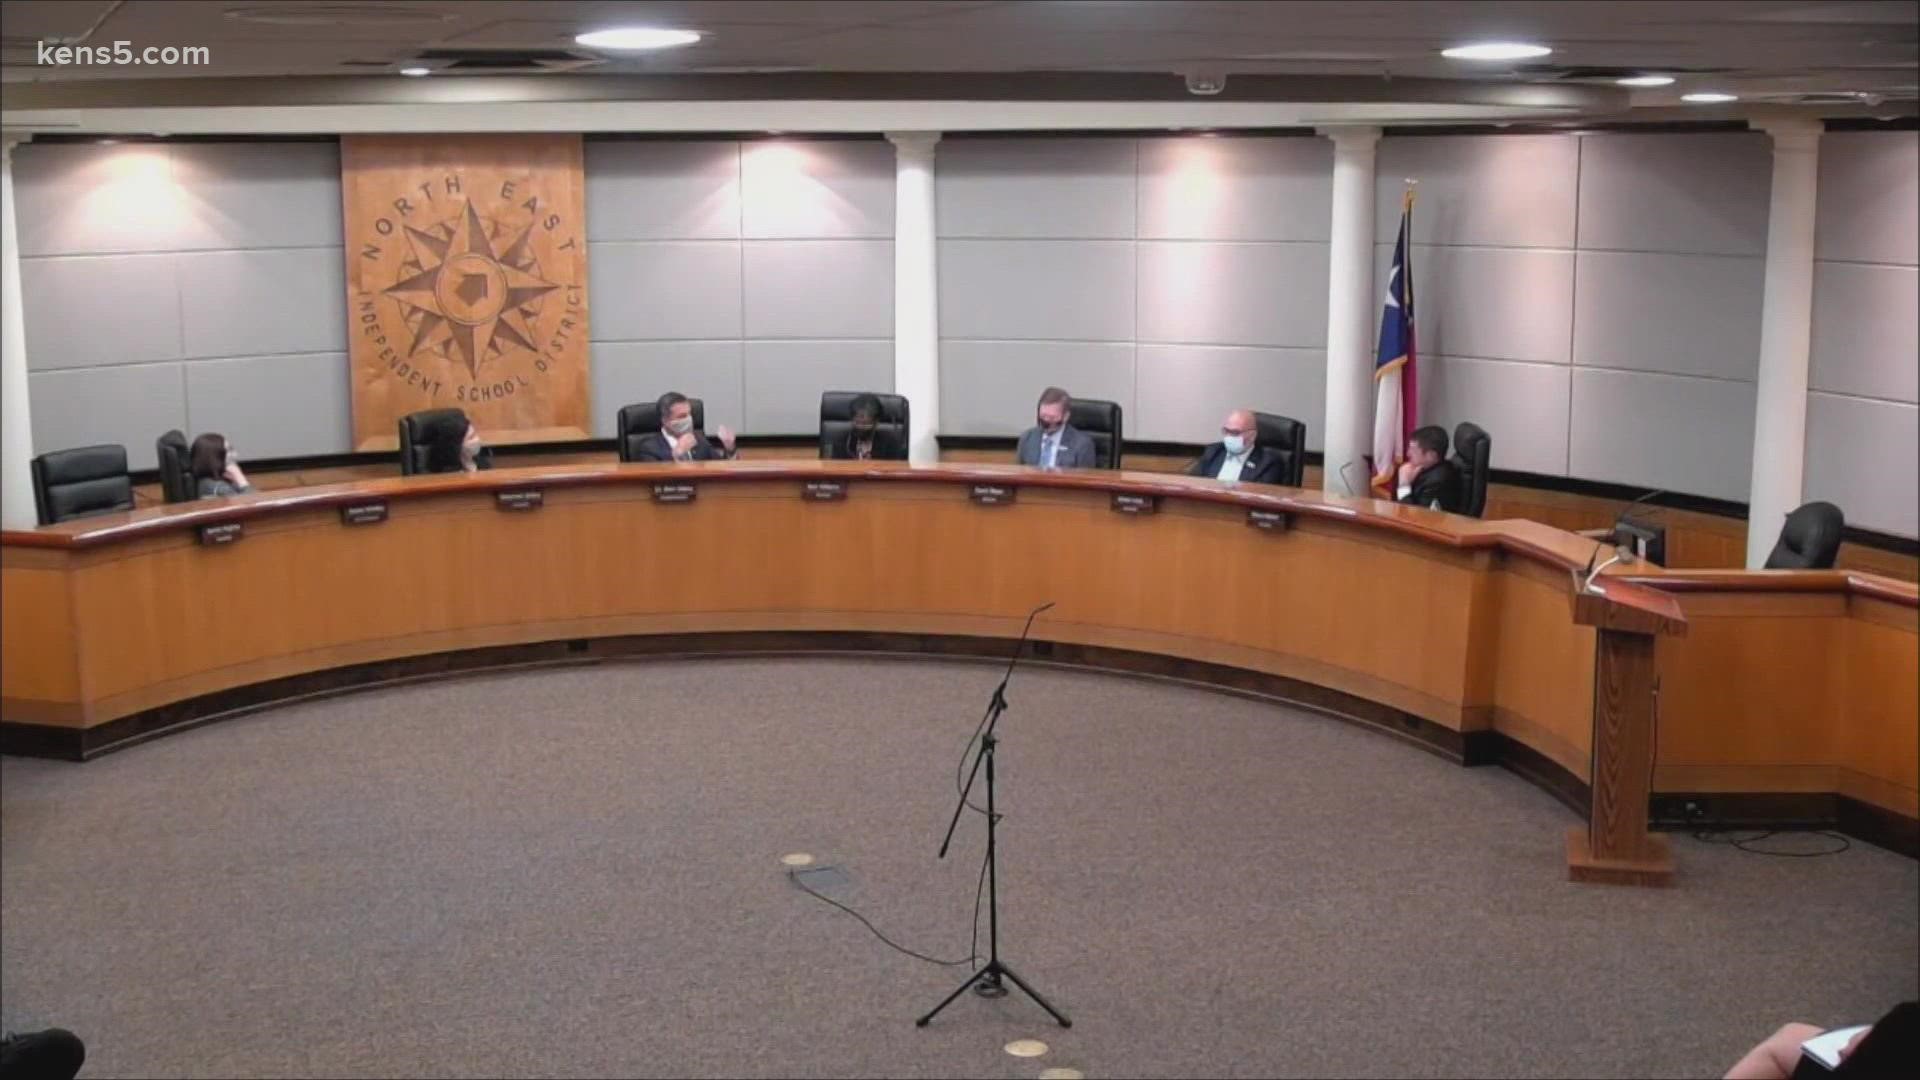 The NEISD decision came late Thursday following an emergency board meeting.